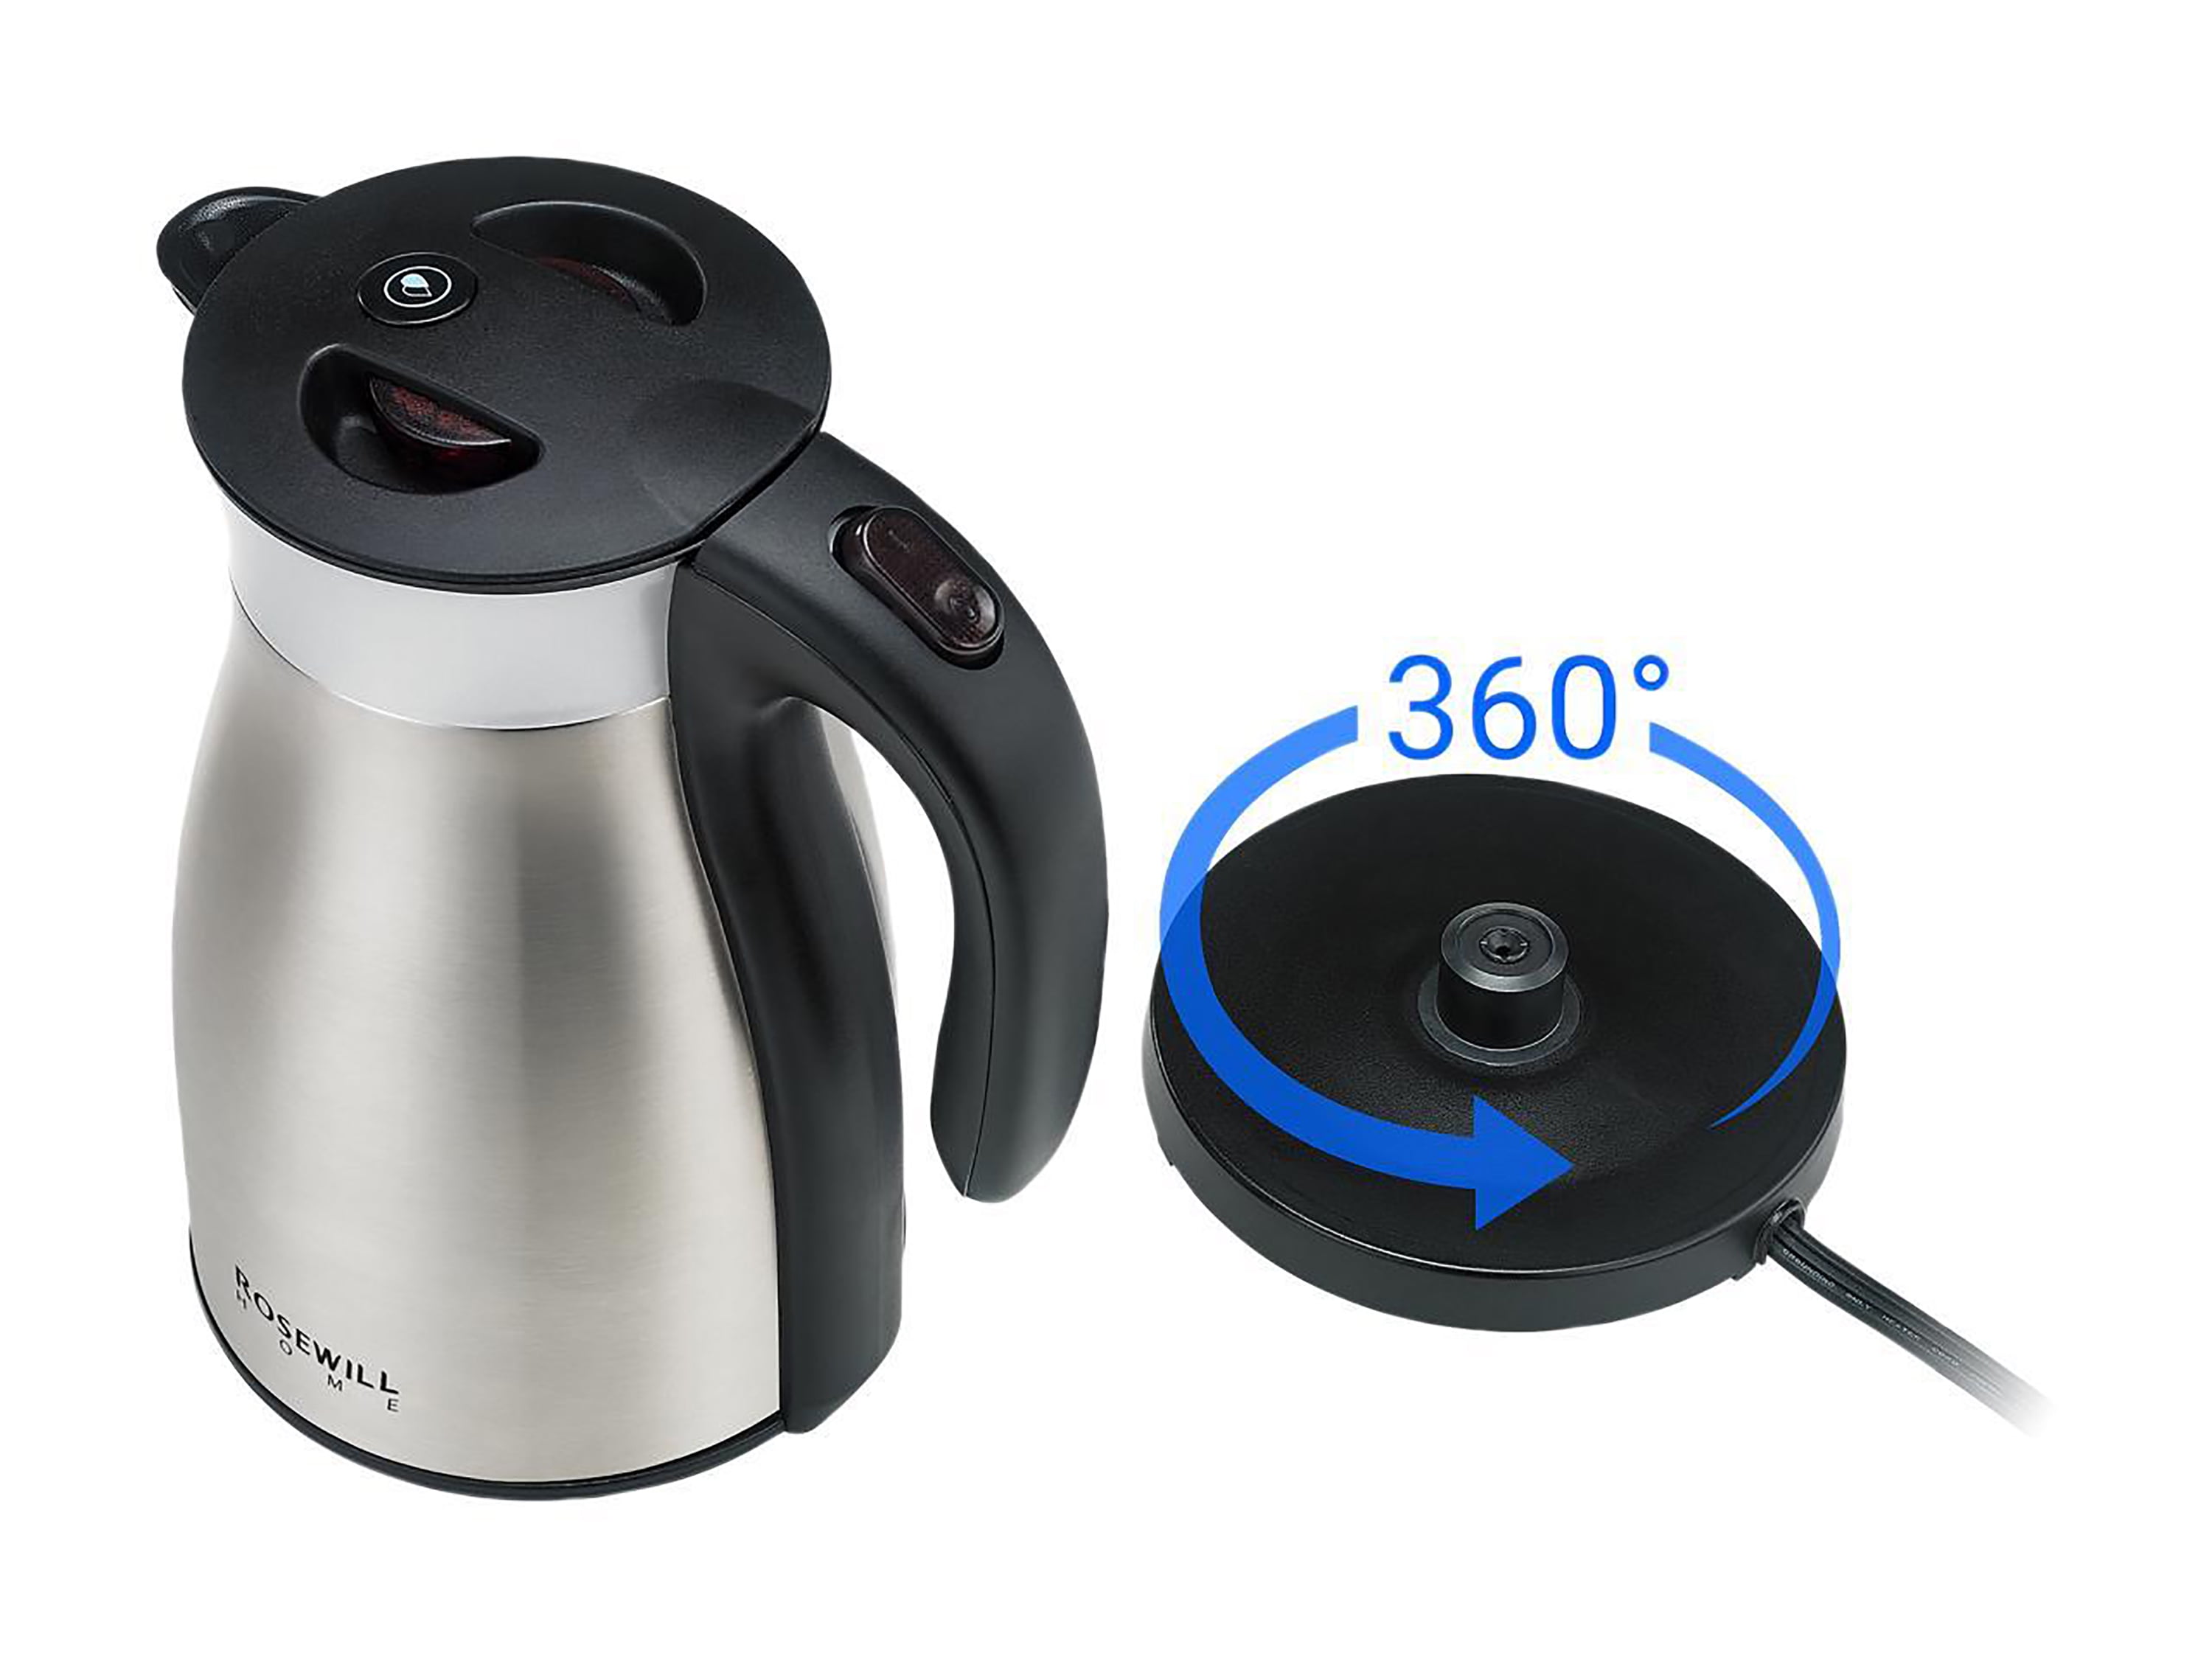 Stainless Steel Electric Kettle - 1.7 Liter - 40989